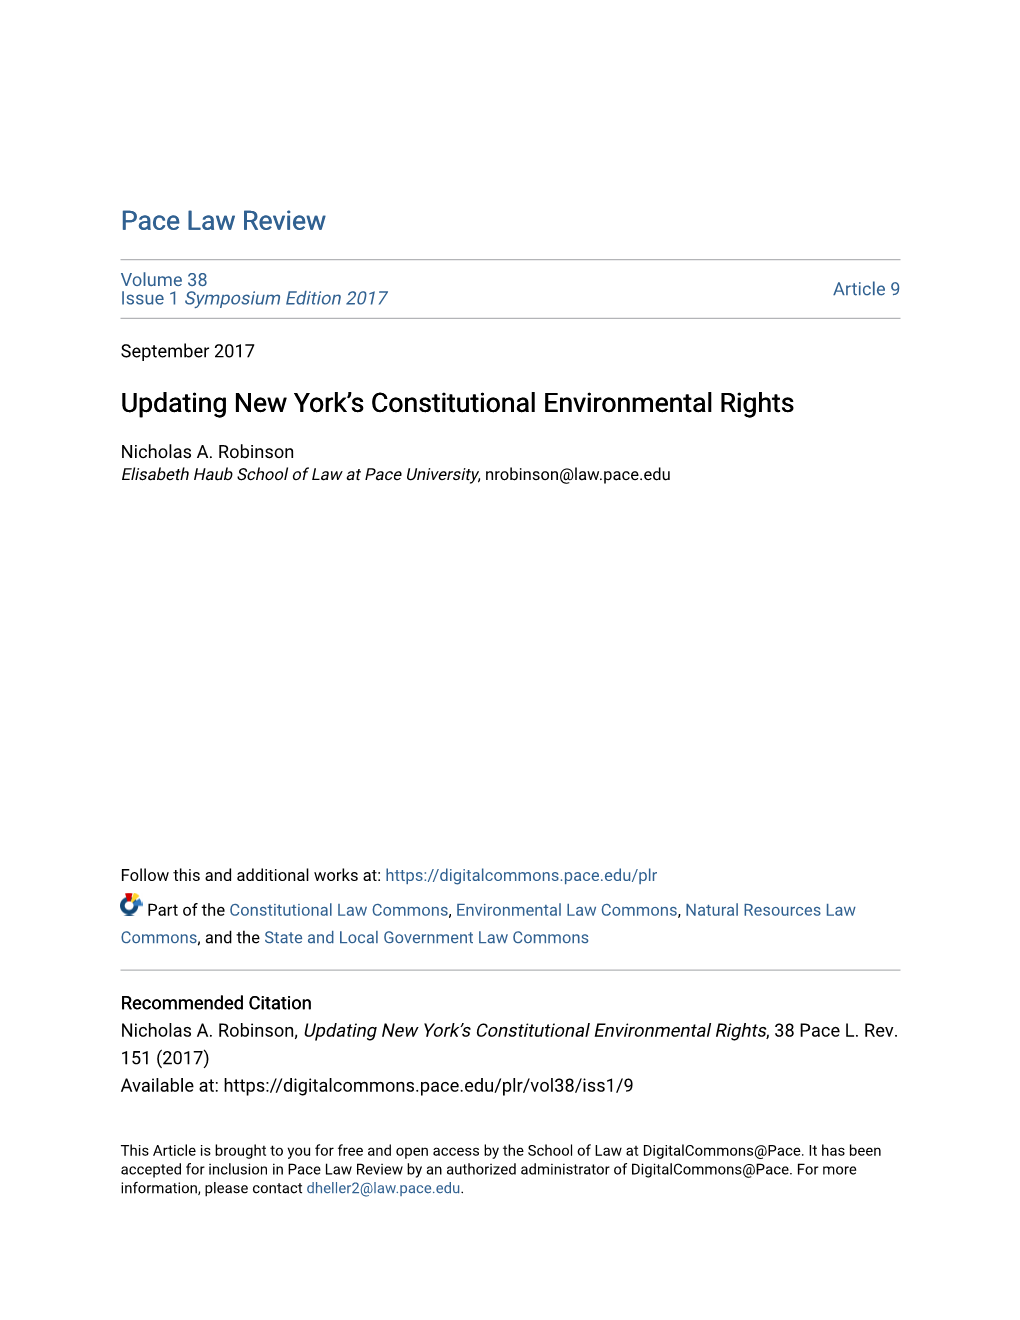 Updating New York's Constitutional Environmental Rights